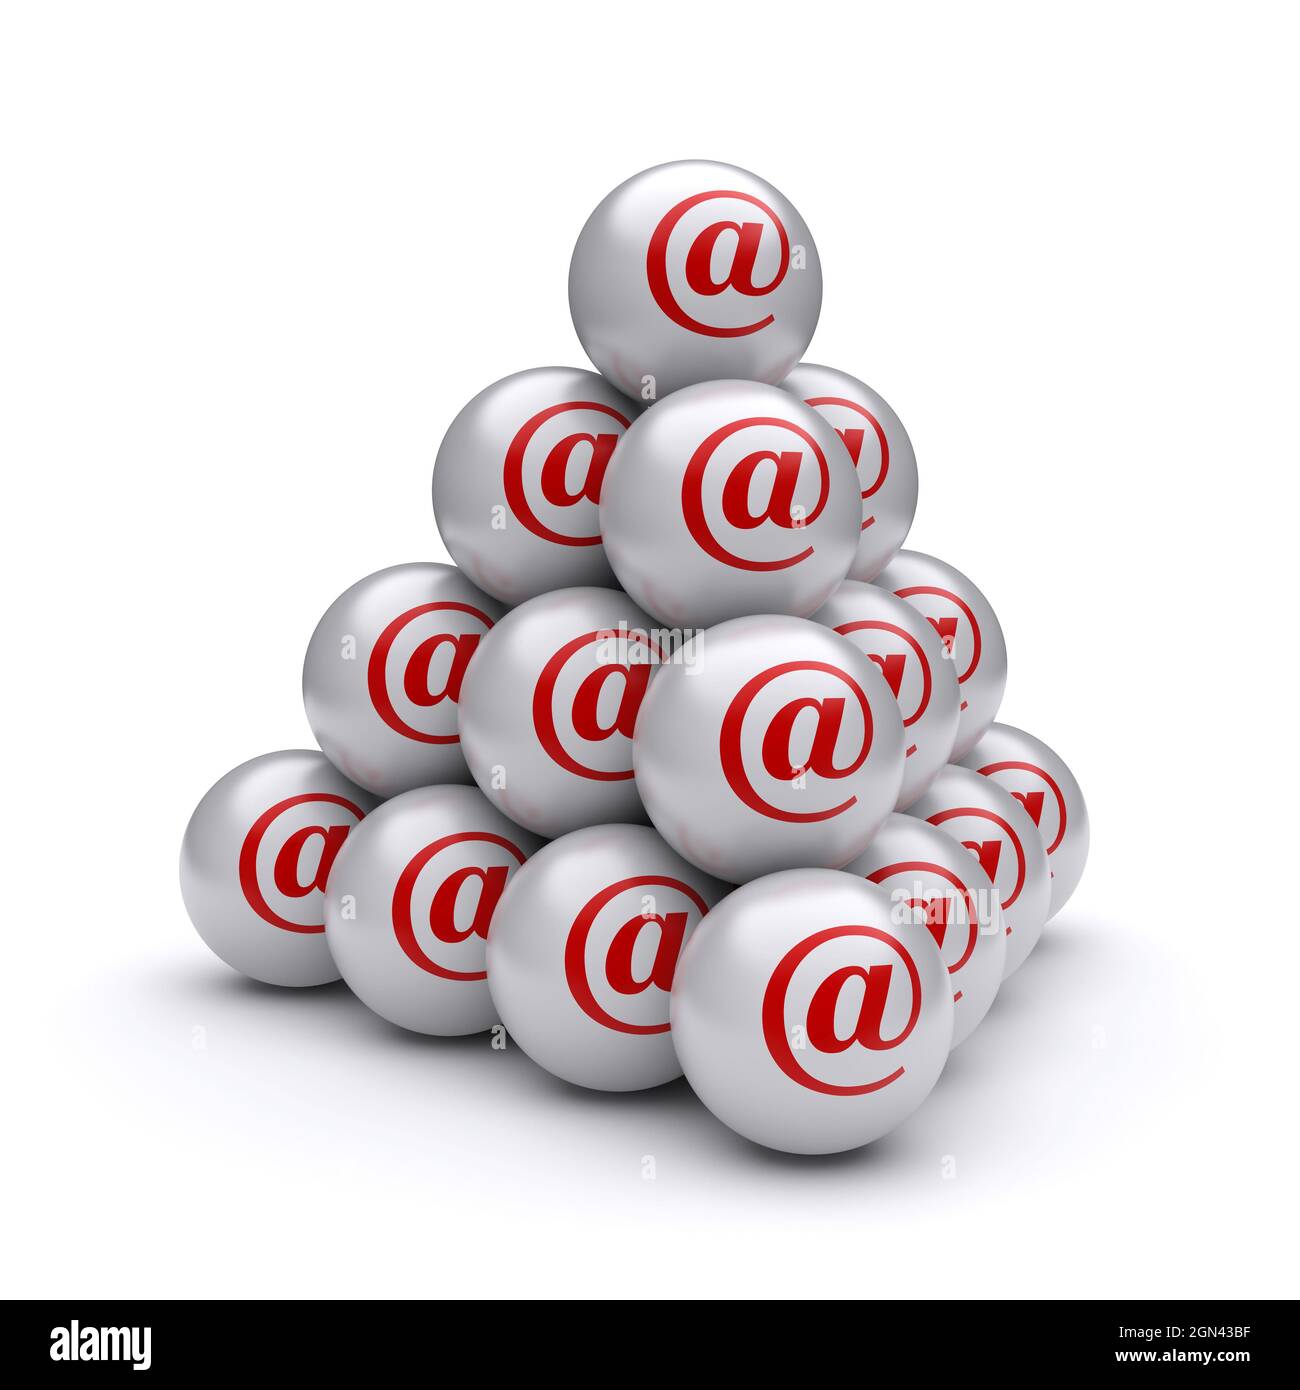 E-mail pyramid. 3d rendered image Stock Photo